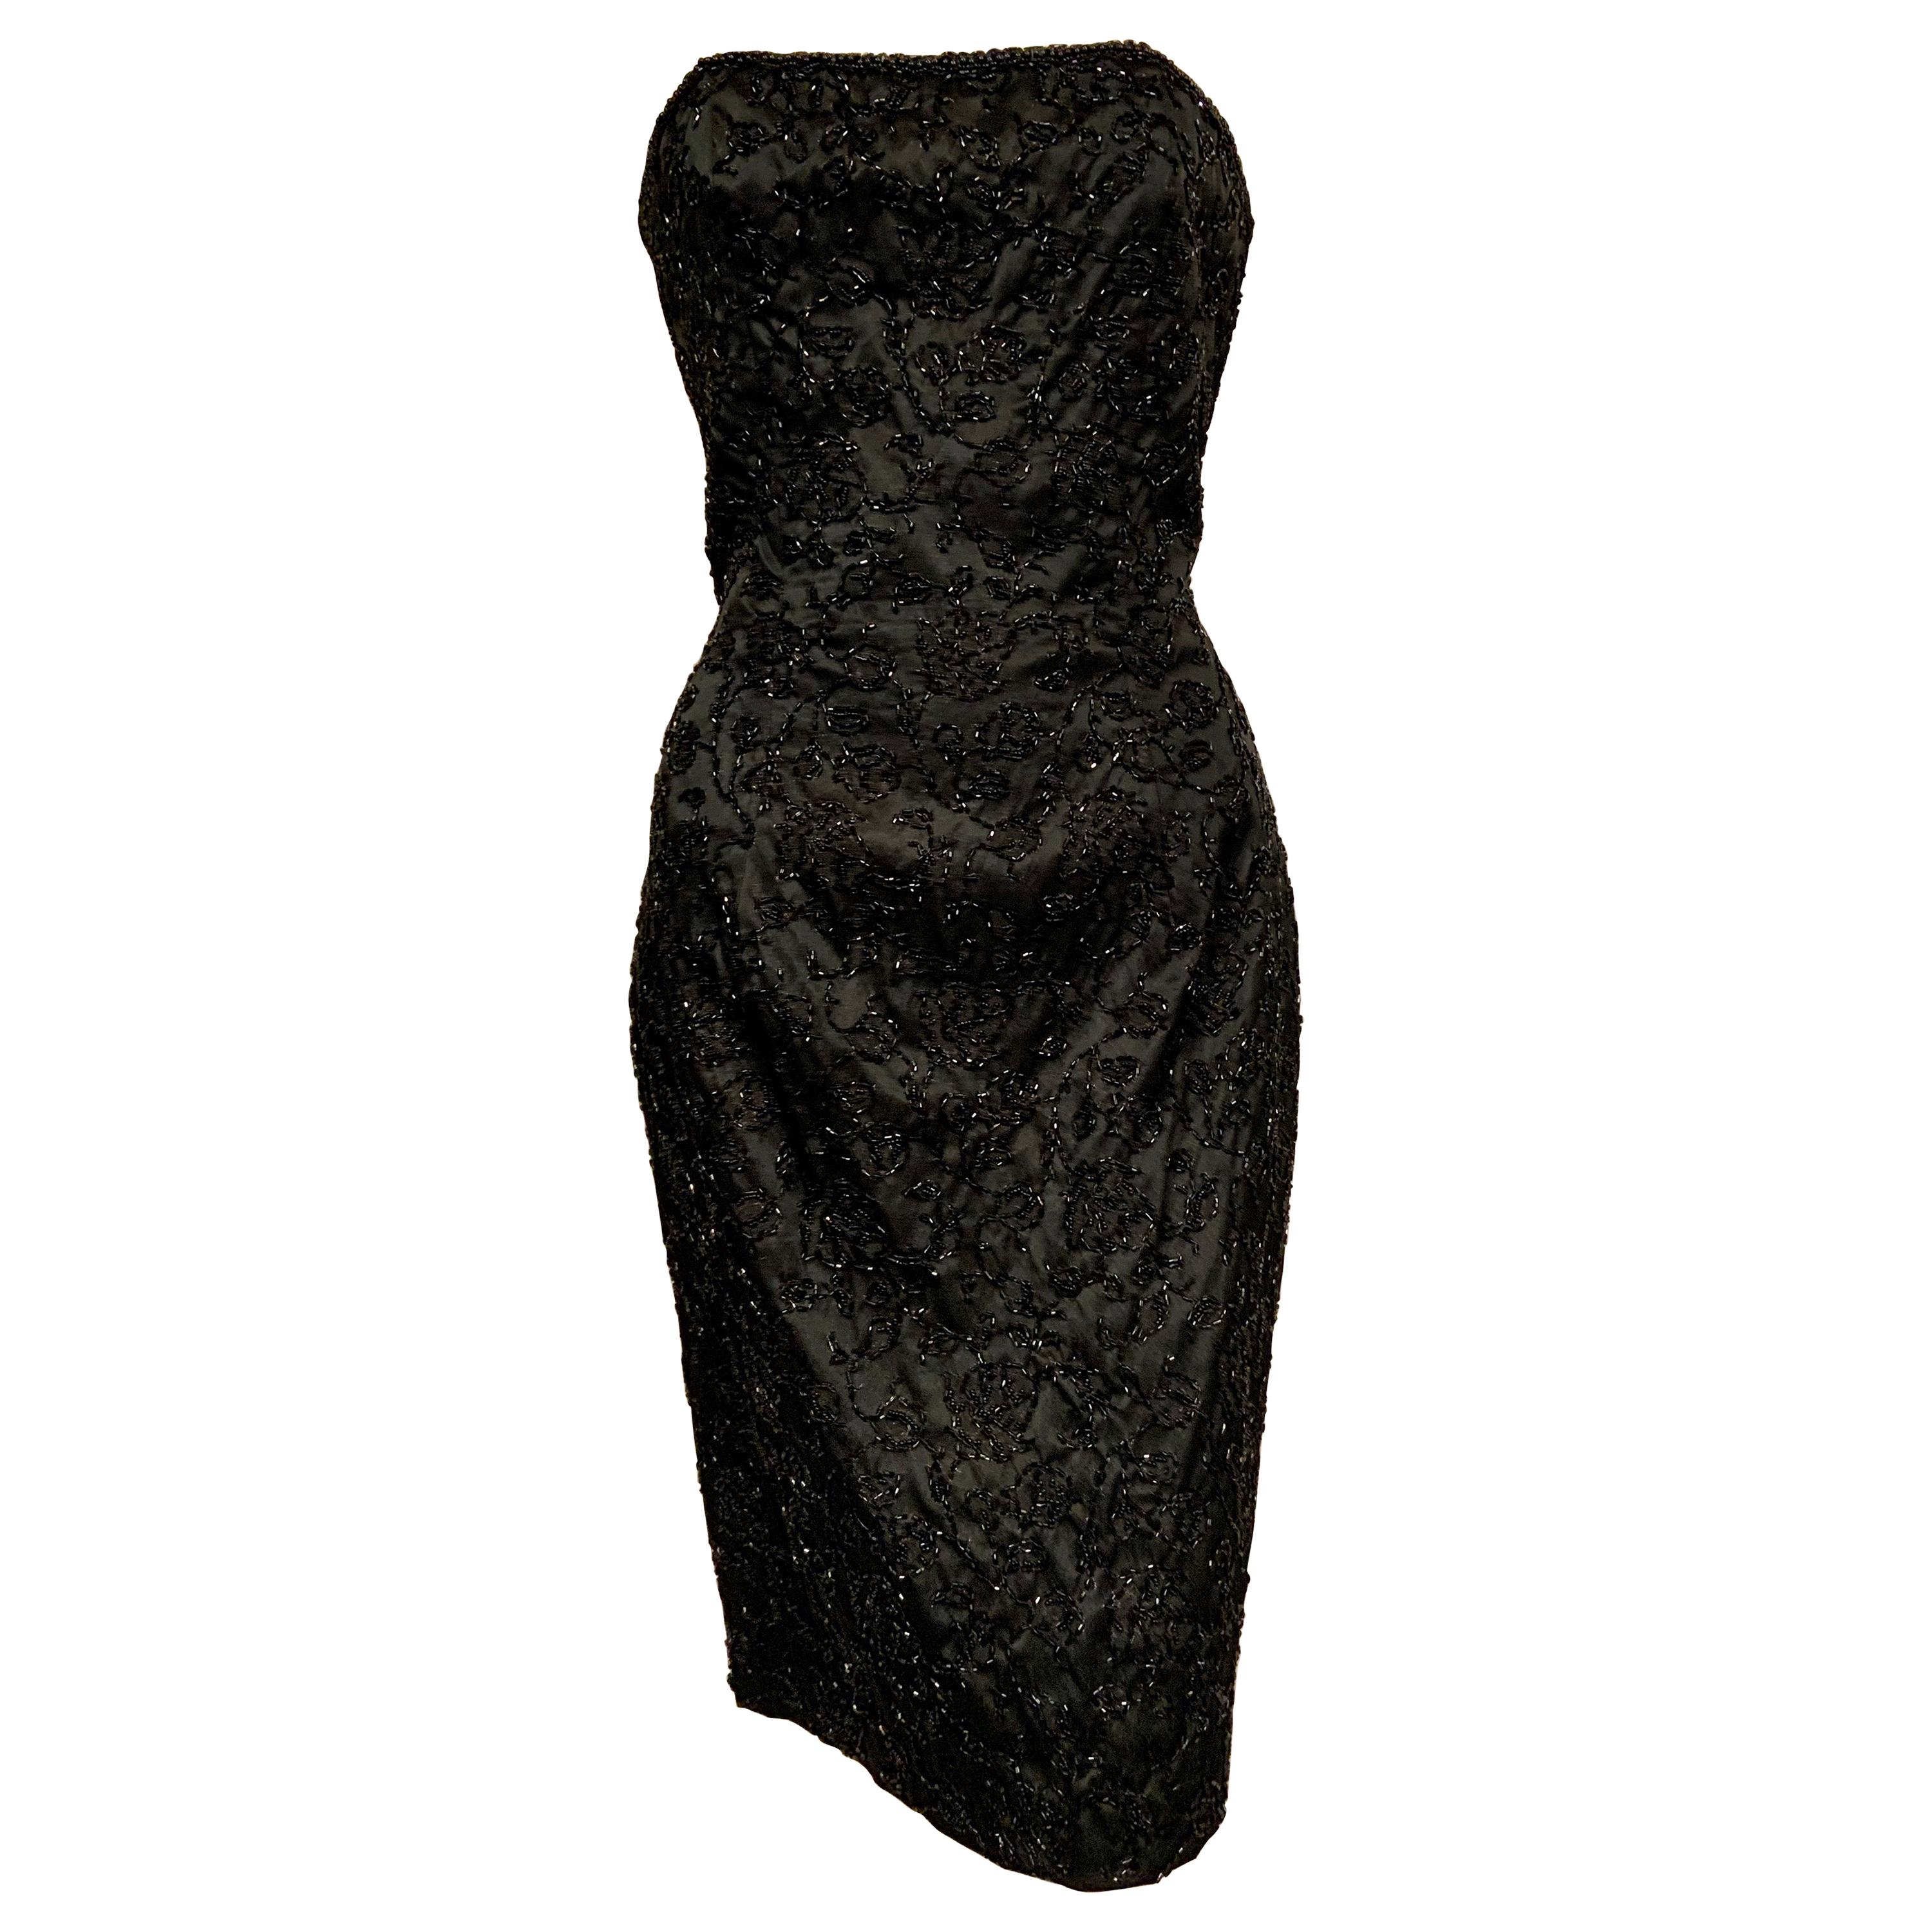 Elaborately Beaded Strapless Black Cocktail Dress and Jacket  circa 1950 For Sale 10